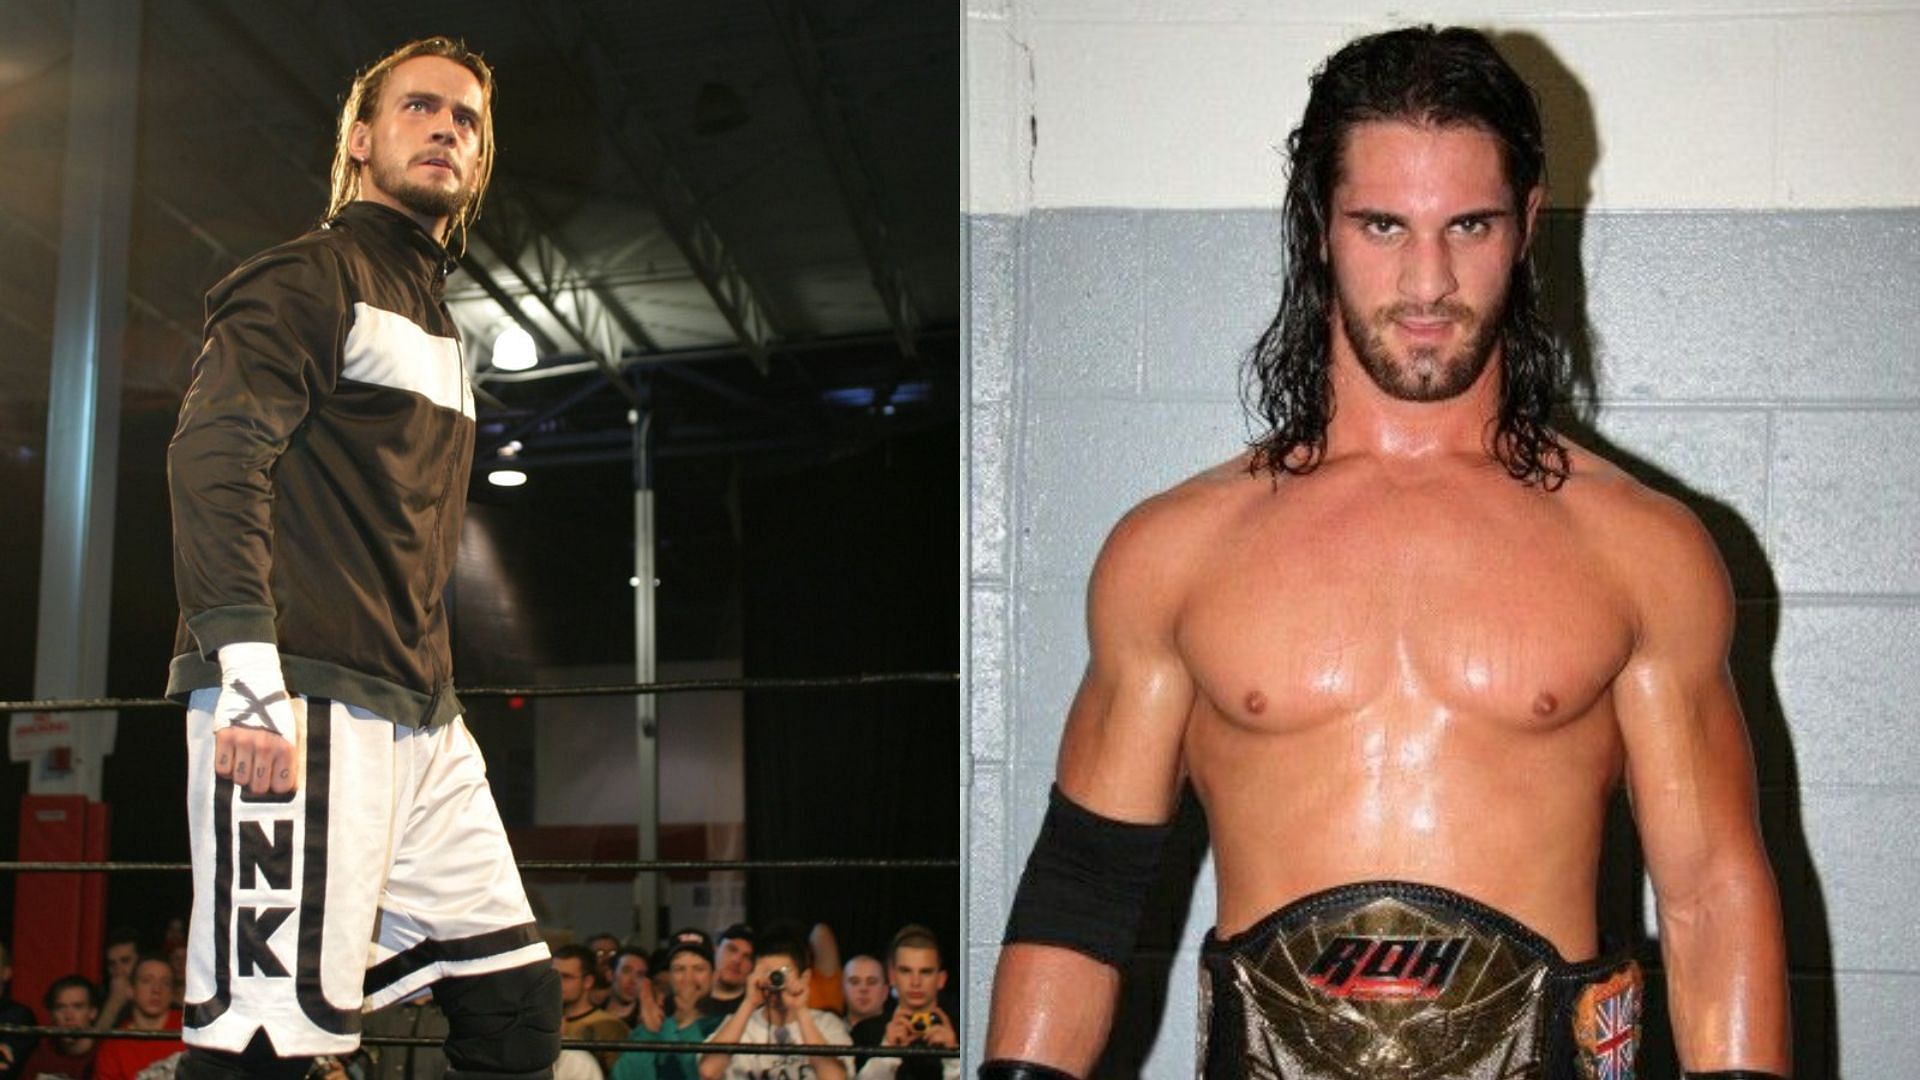 Punk and Rollins both achieved great things on the independent scene